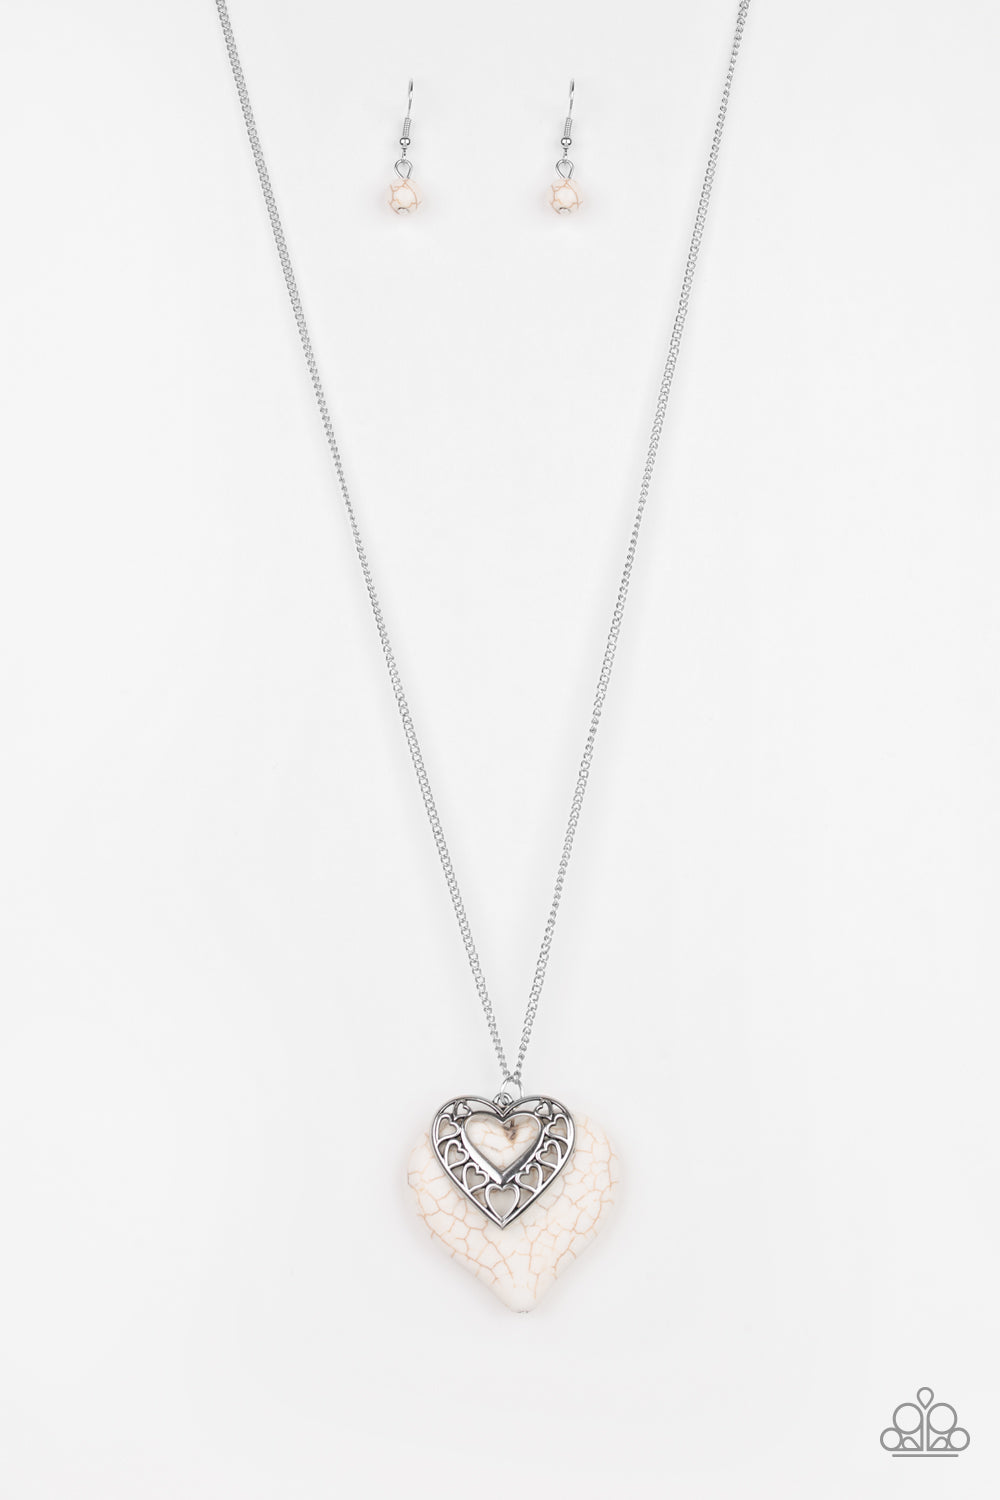 Southern Heart - White Paparazzi Necklace